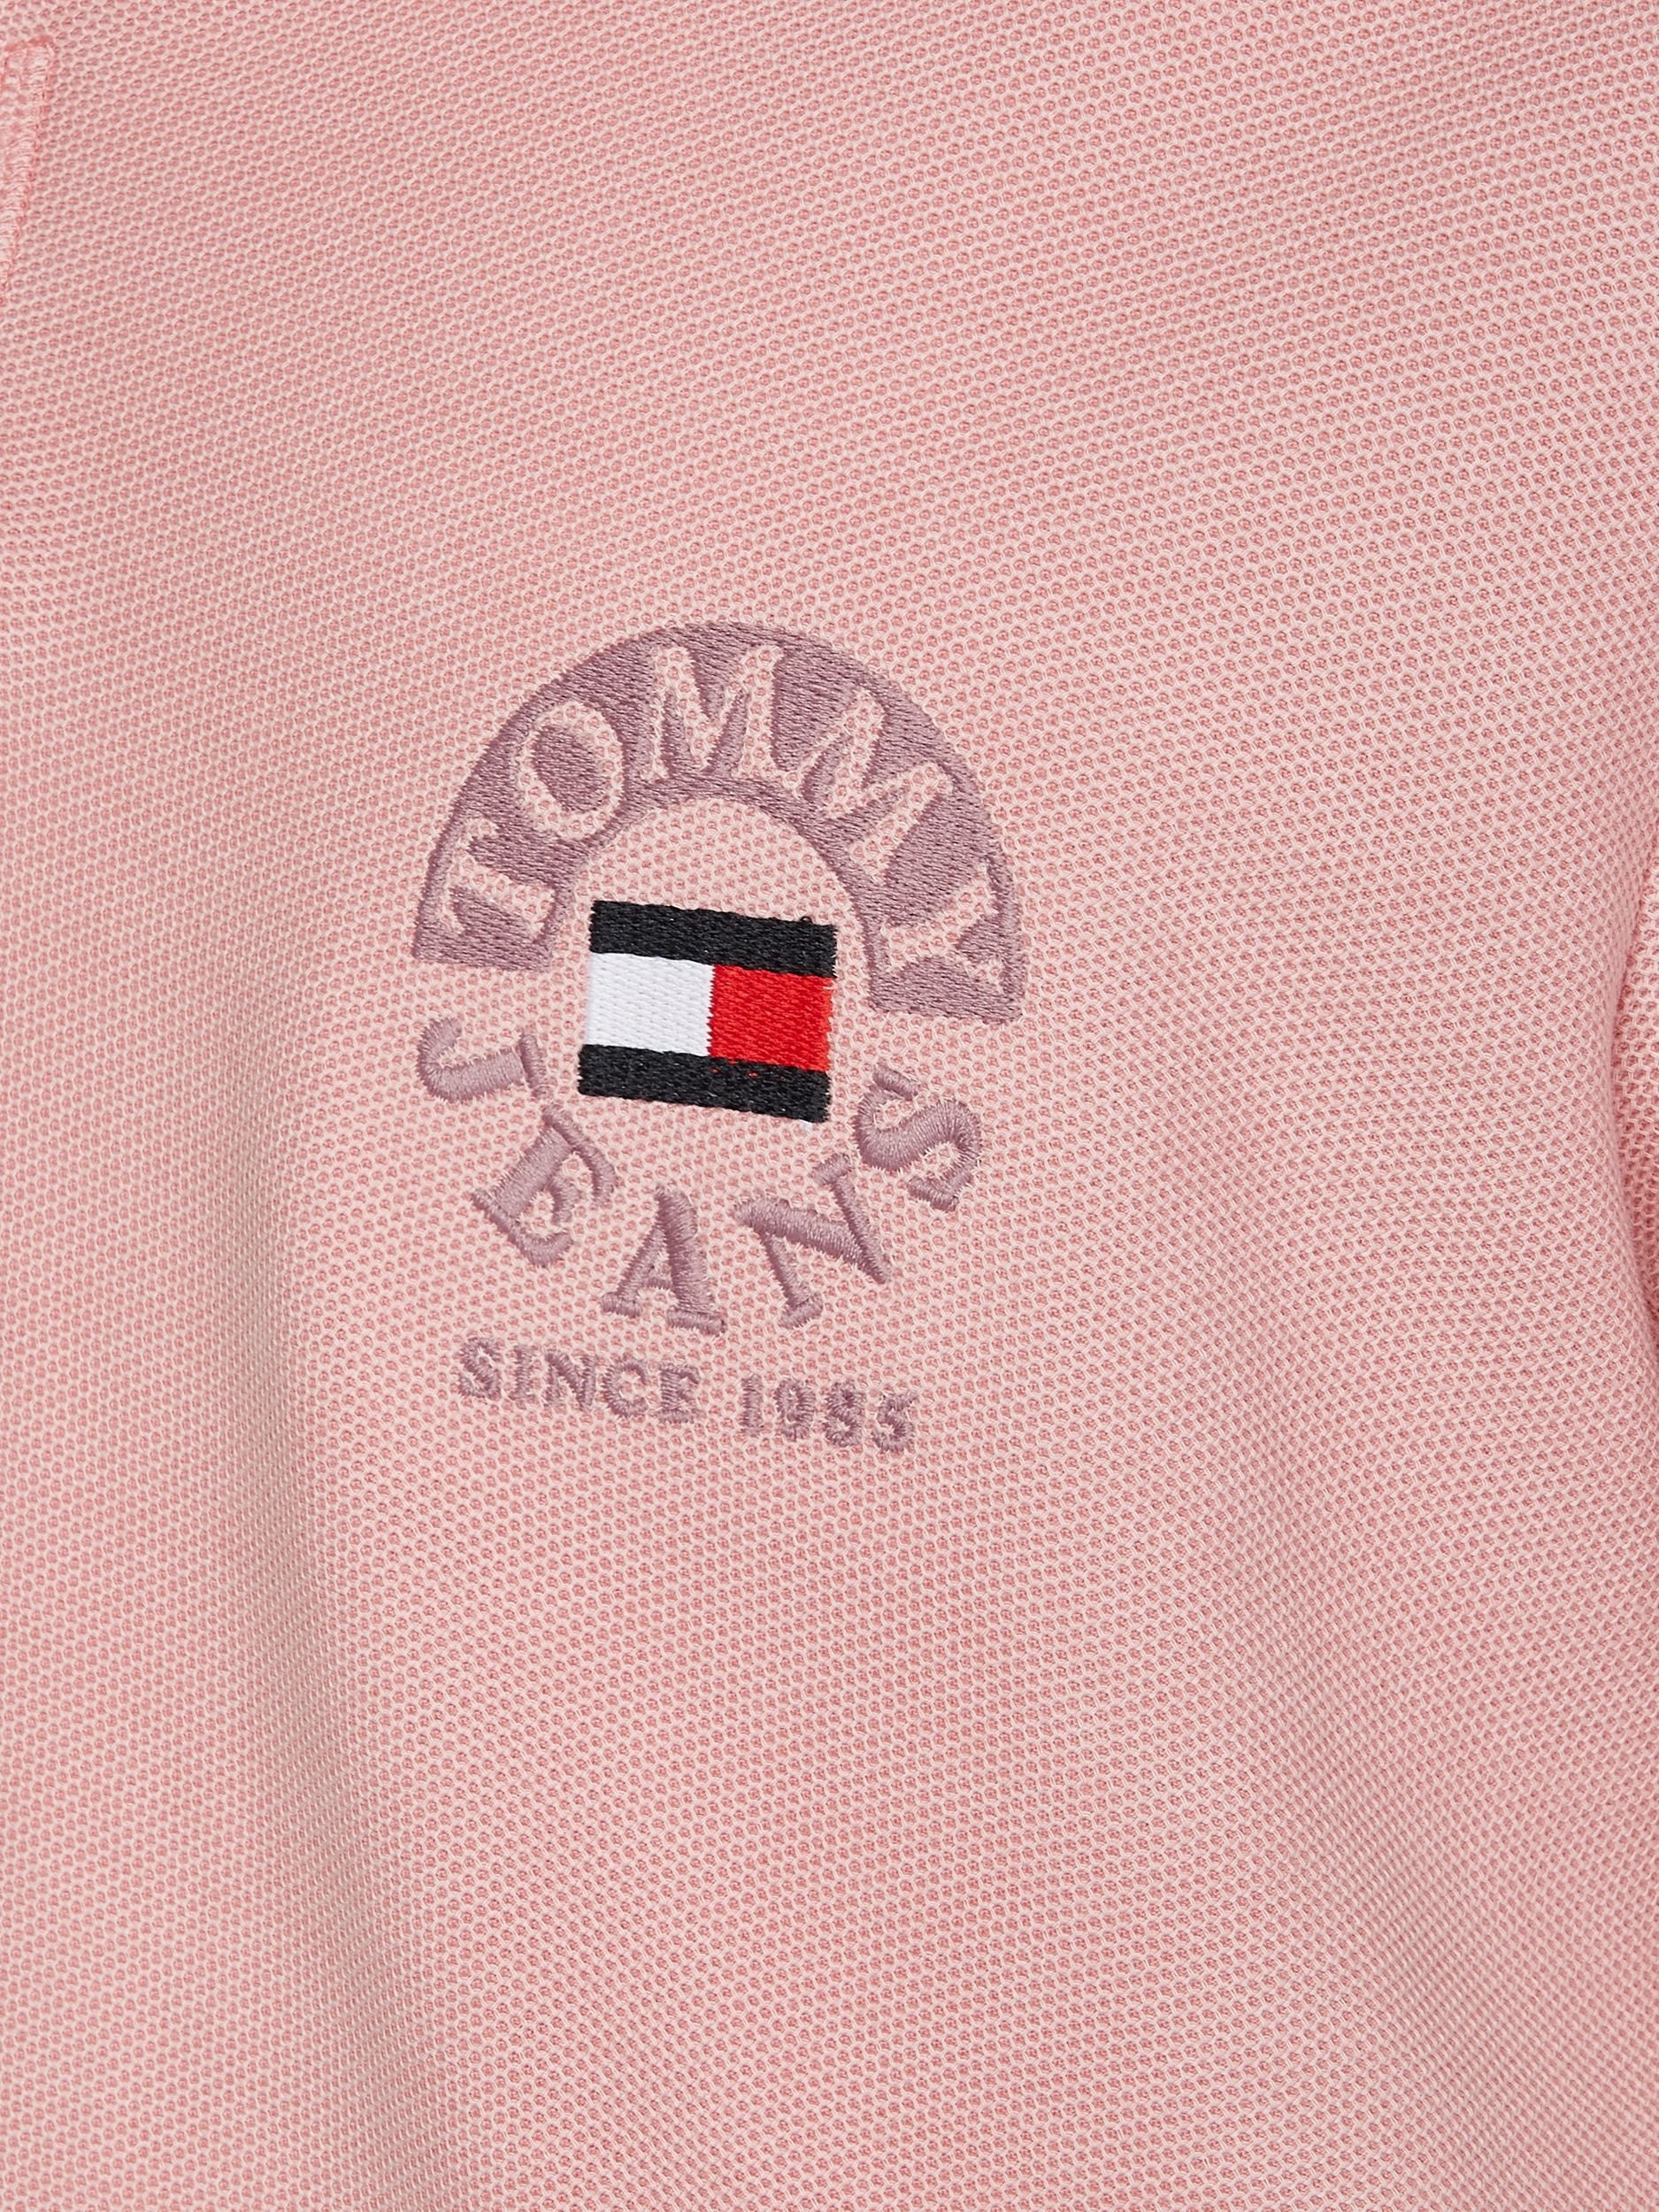 TJM TIMELESS TOMMY CIRCLE POLO